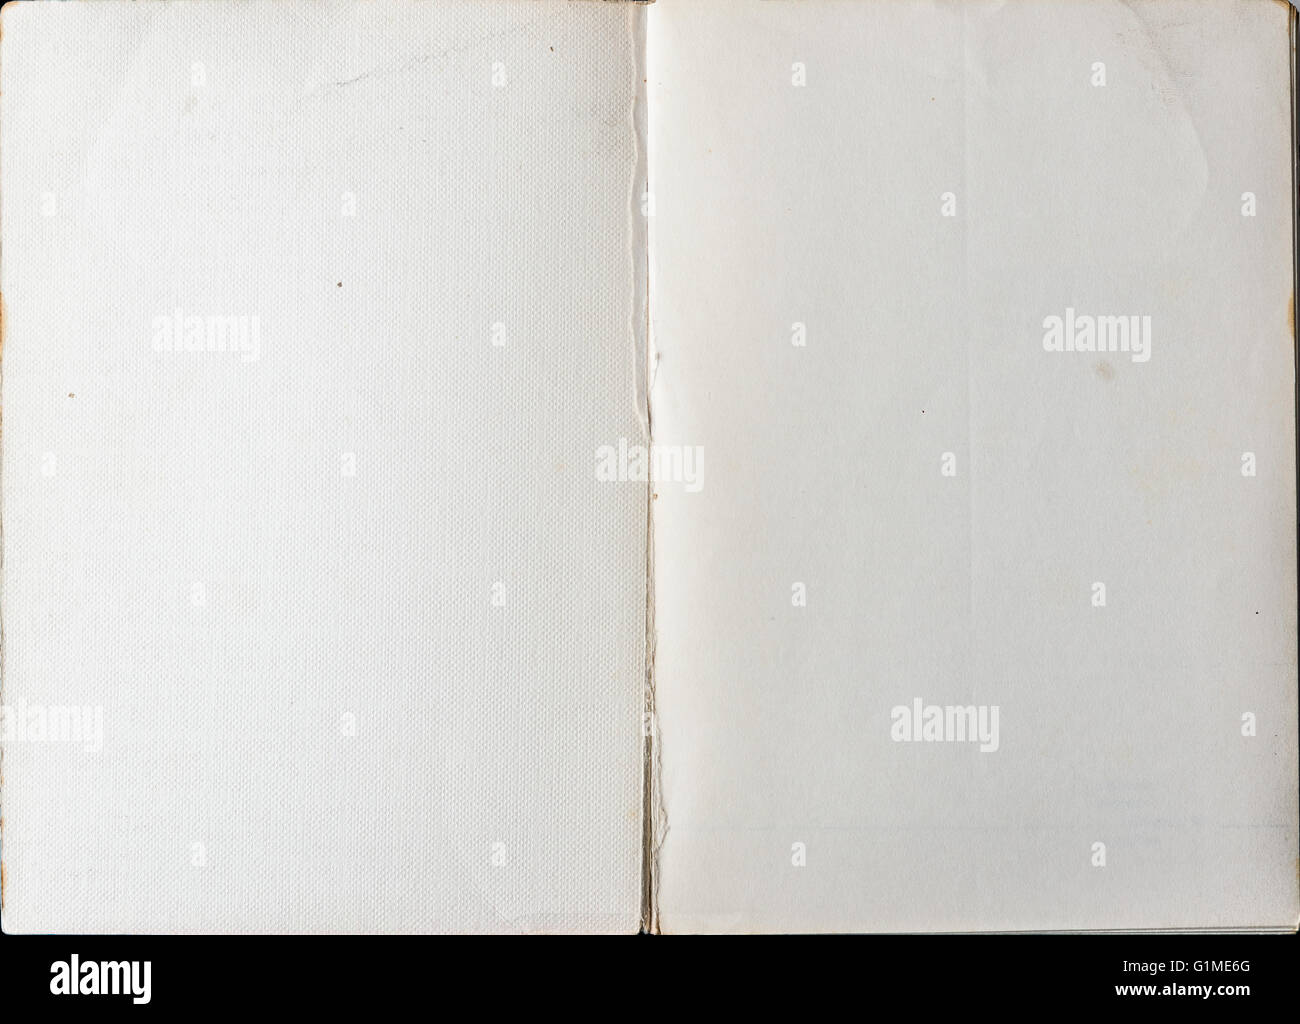 Book opened to the first page showing blank pages inside. Stock Photo